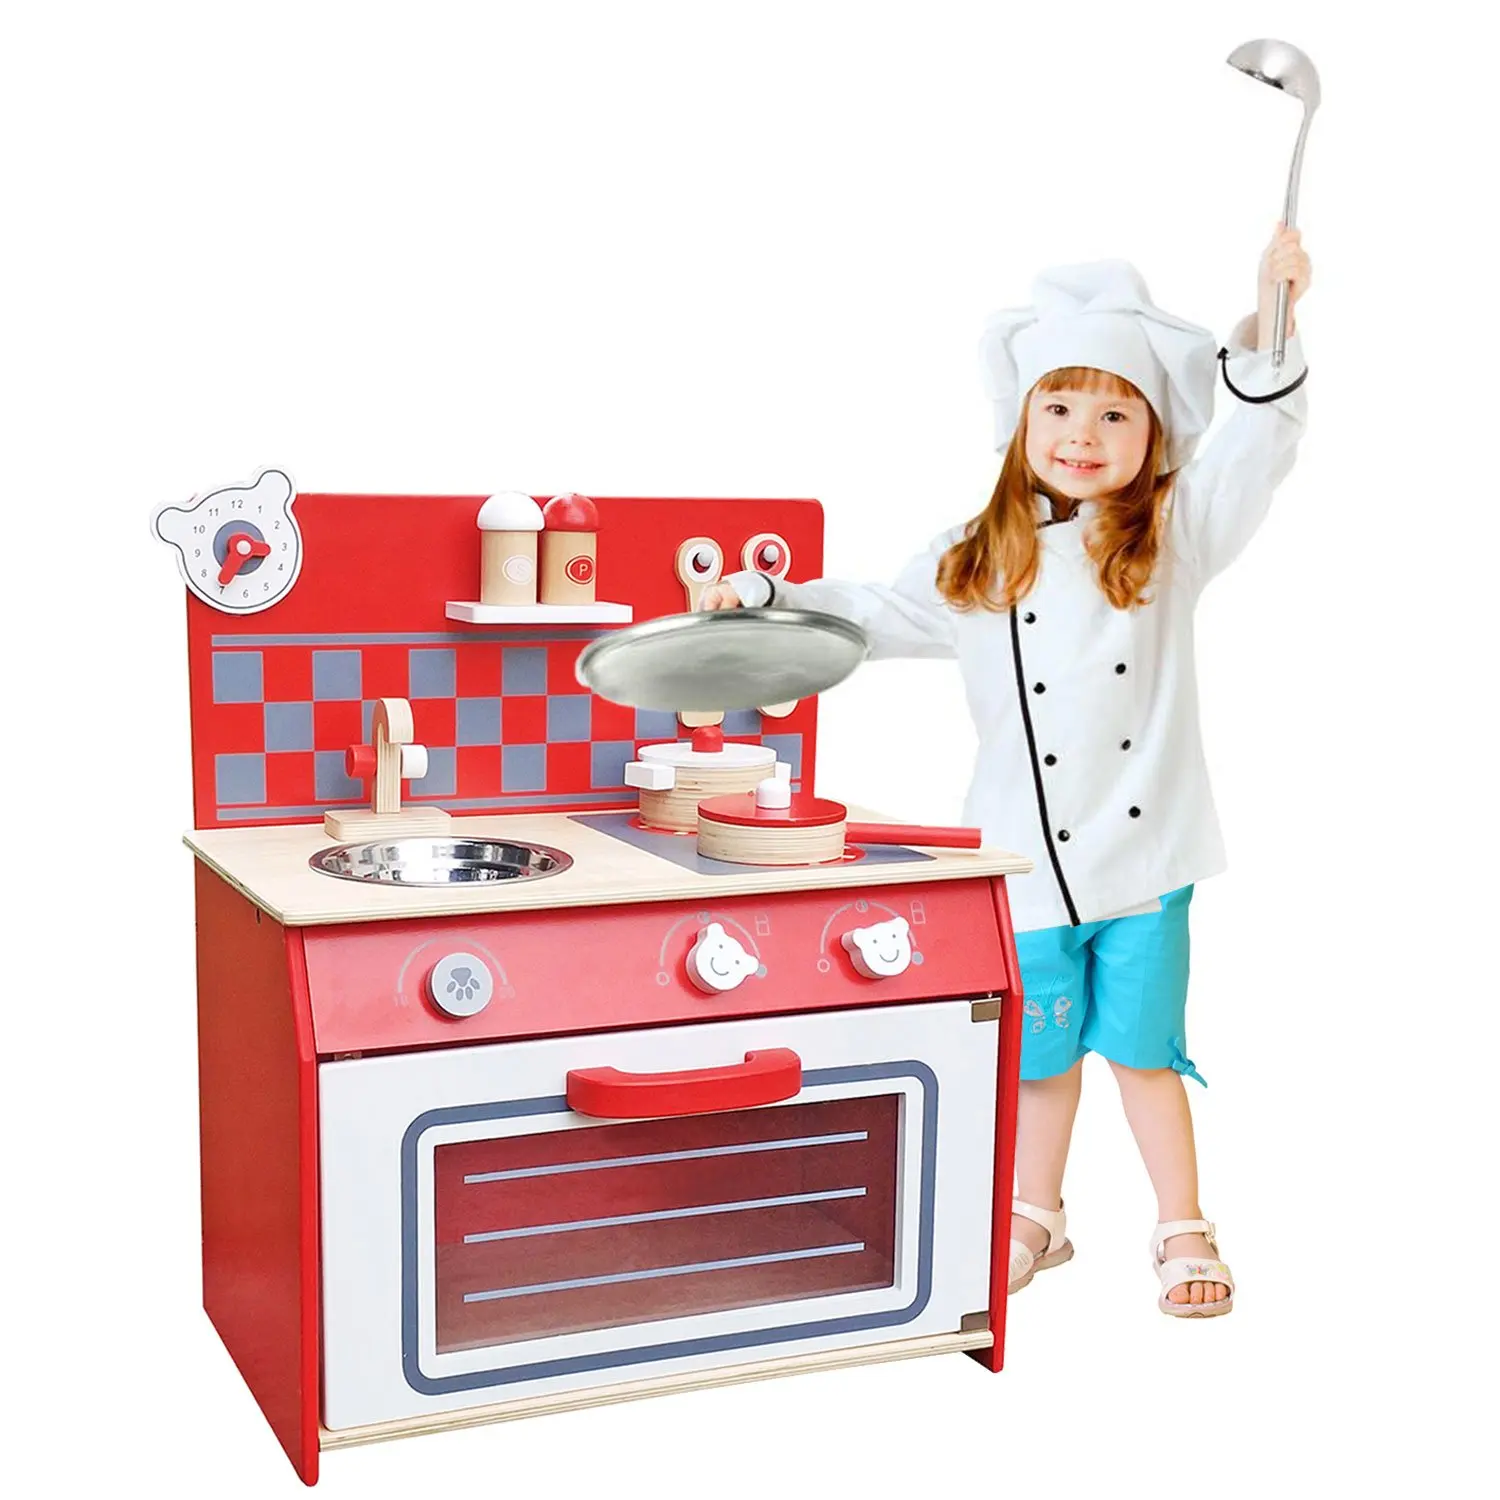 deluxe wooden play kitchen